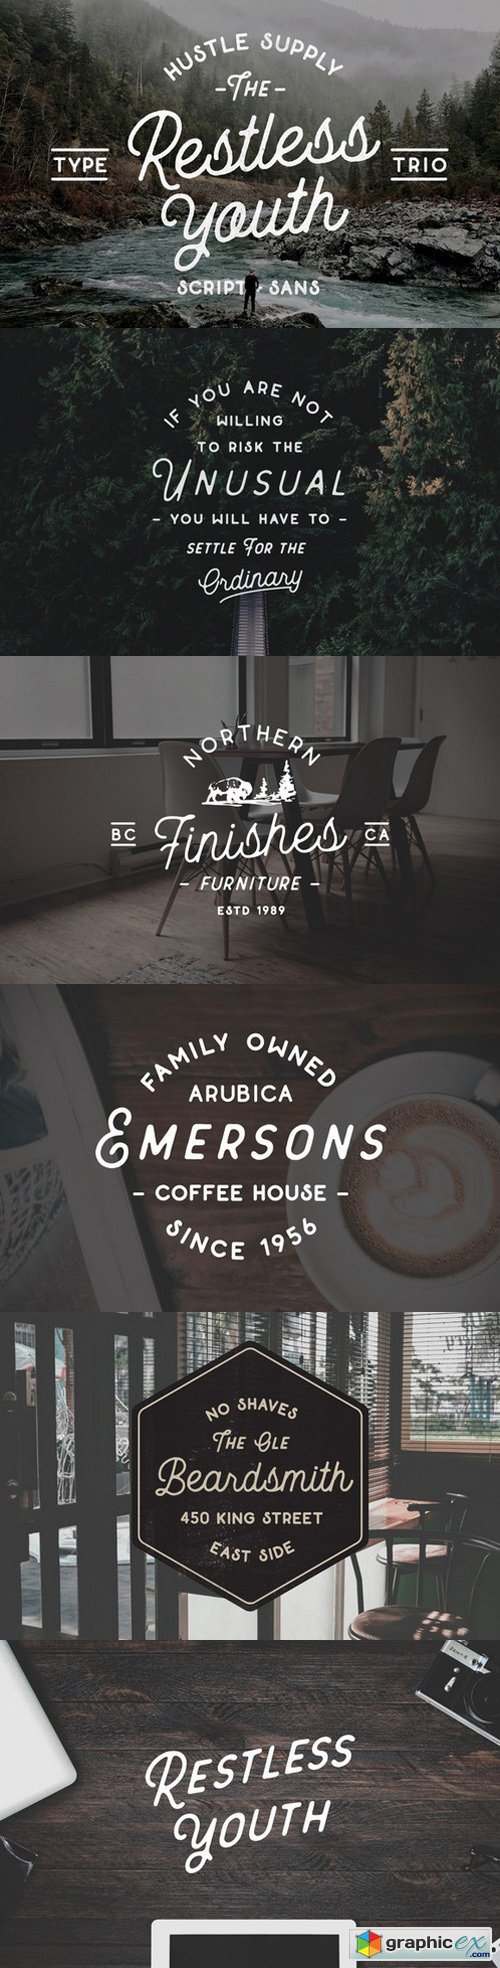 The Restless Youth - Font Bundle 